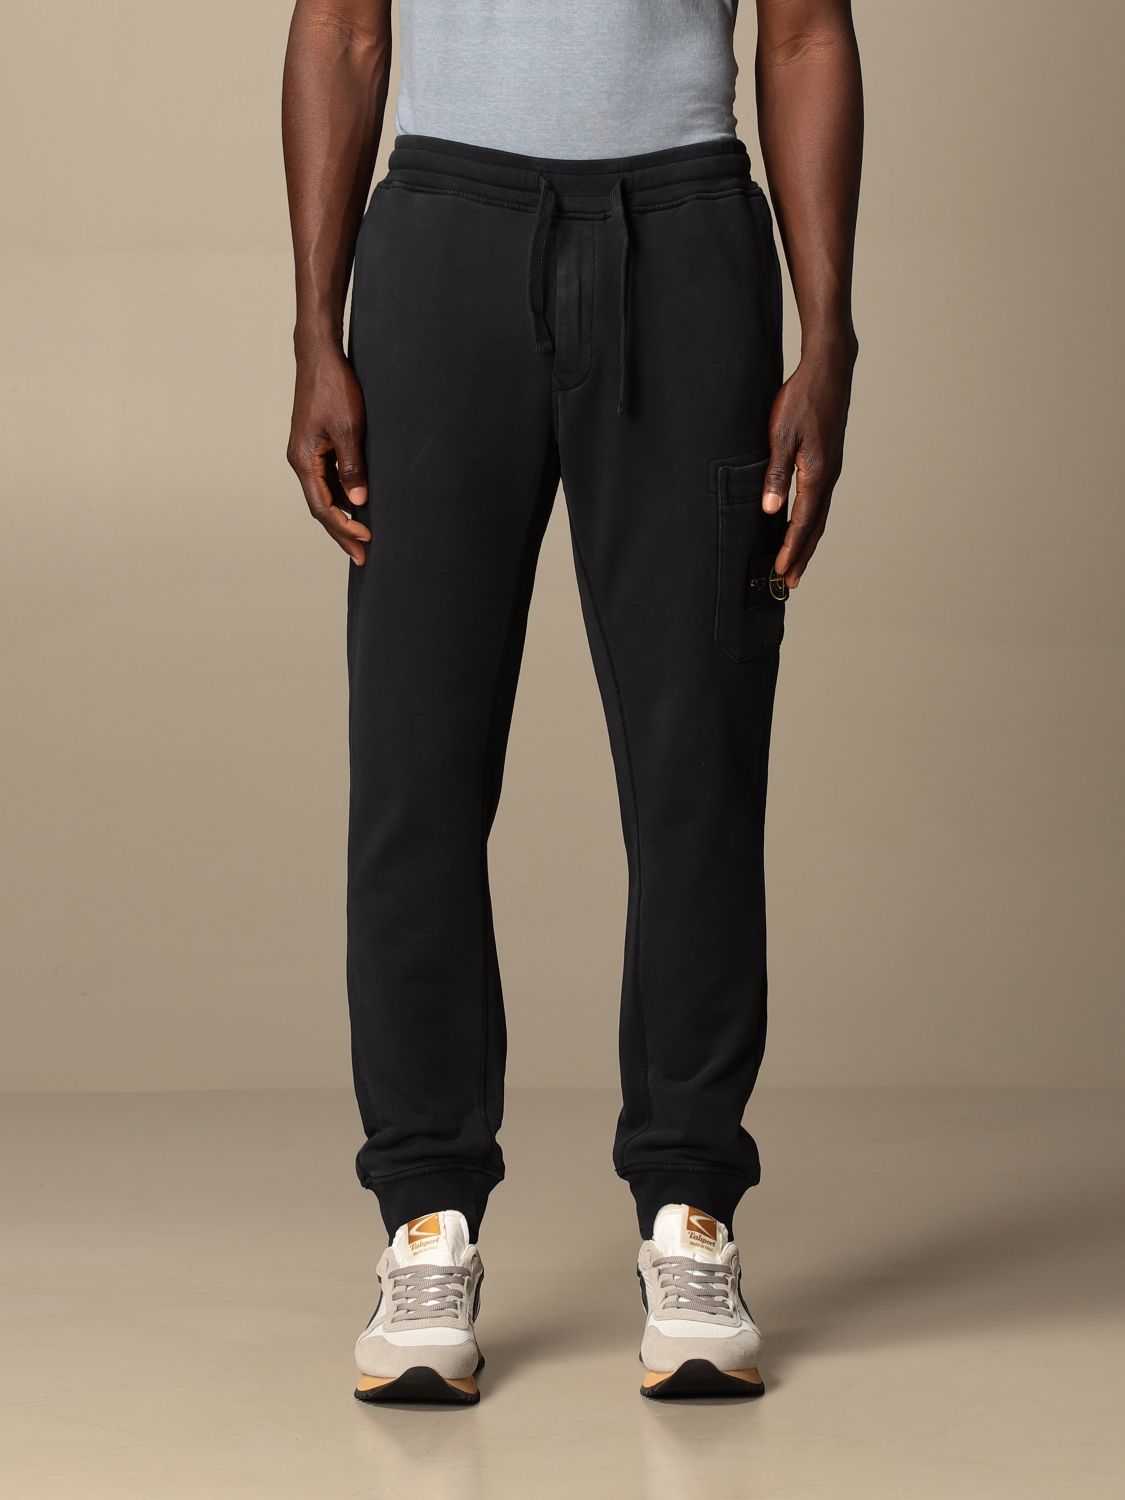 STONE ISLAND: jogging trousers in cotton - Blue | Stone Island pants ...